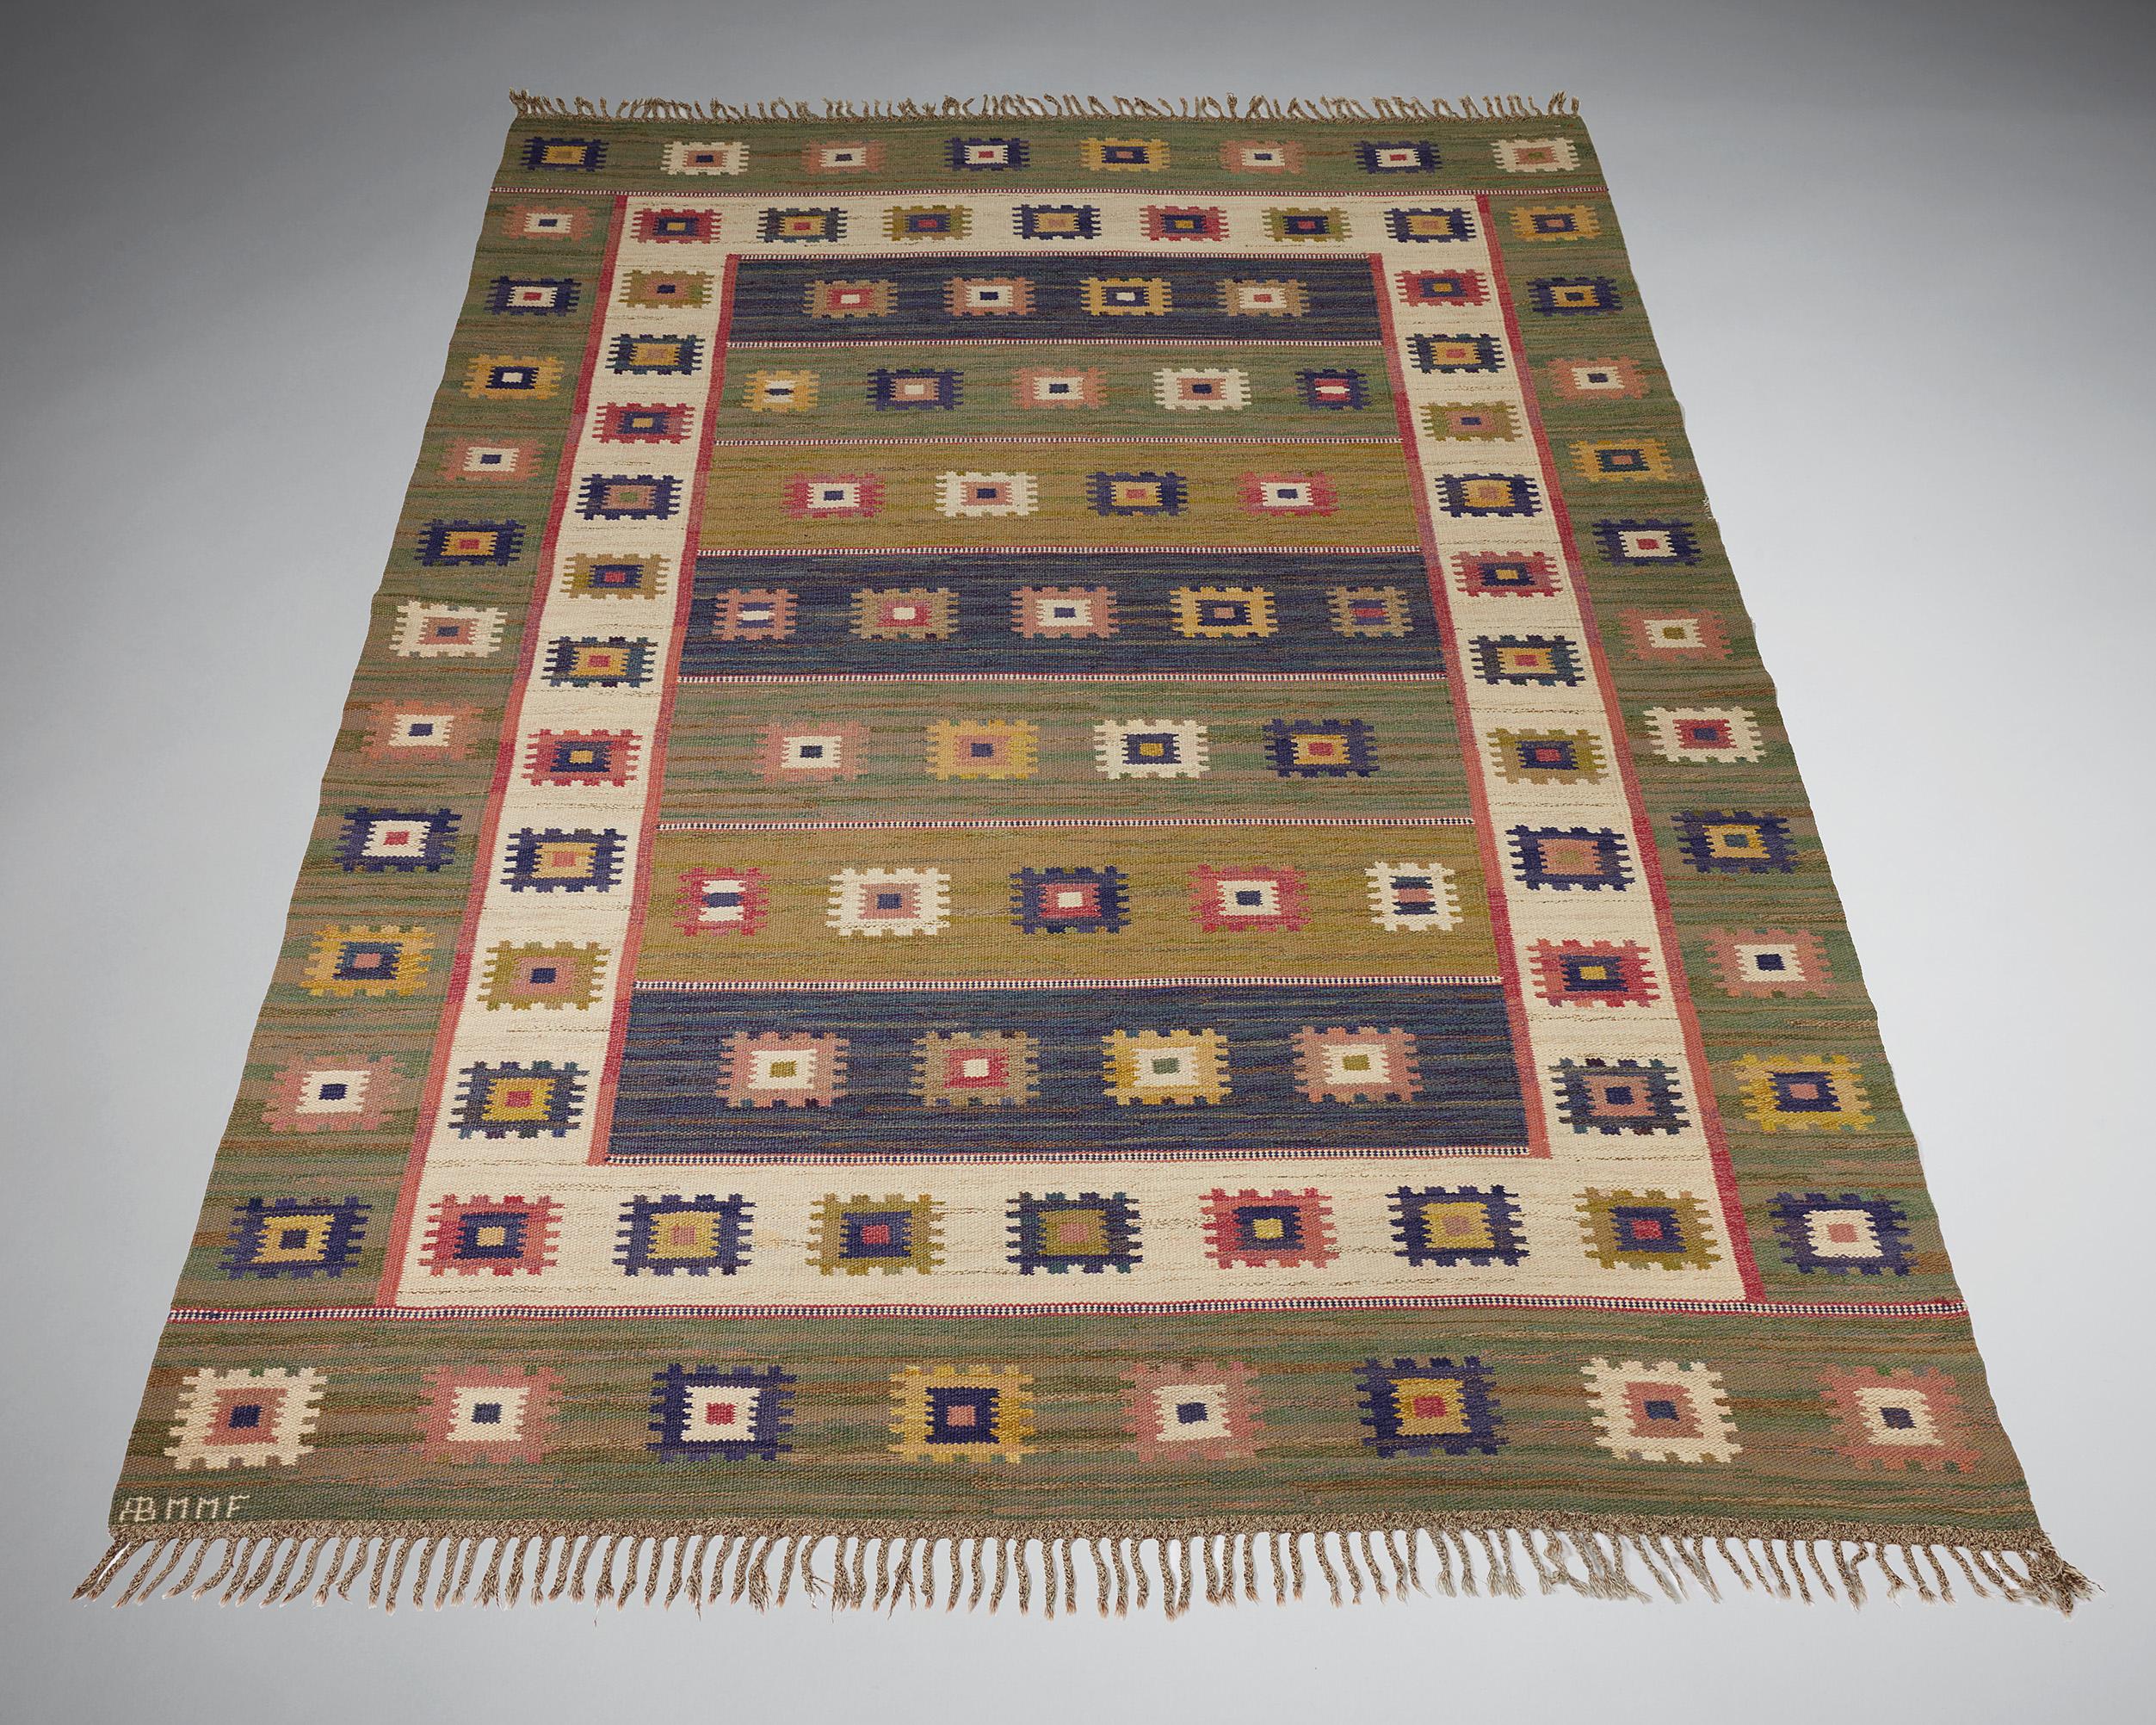 Rug ‘Green Meadow’ designed by Märta Måås-Fjetterström for MMF AB,
Sweden, 1928.

Wool.

Signed.

This example was woven after 1941.

Measurements:
Length without tassels: 355 cm / 11' 7 3/4''
Length with tassels: 376 cm / 12' 4''
W: 247 cm / 8' 1